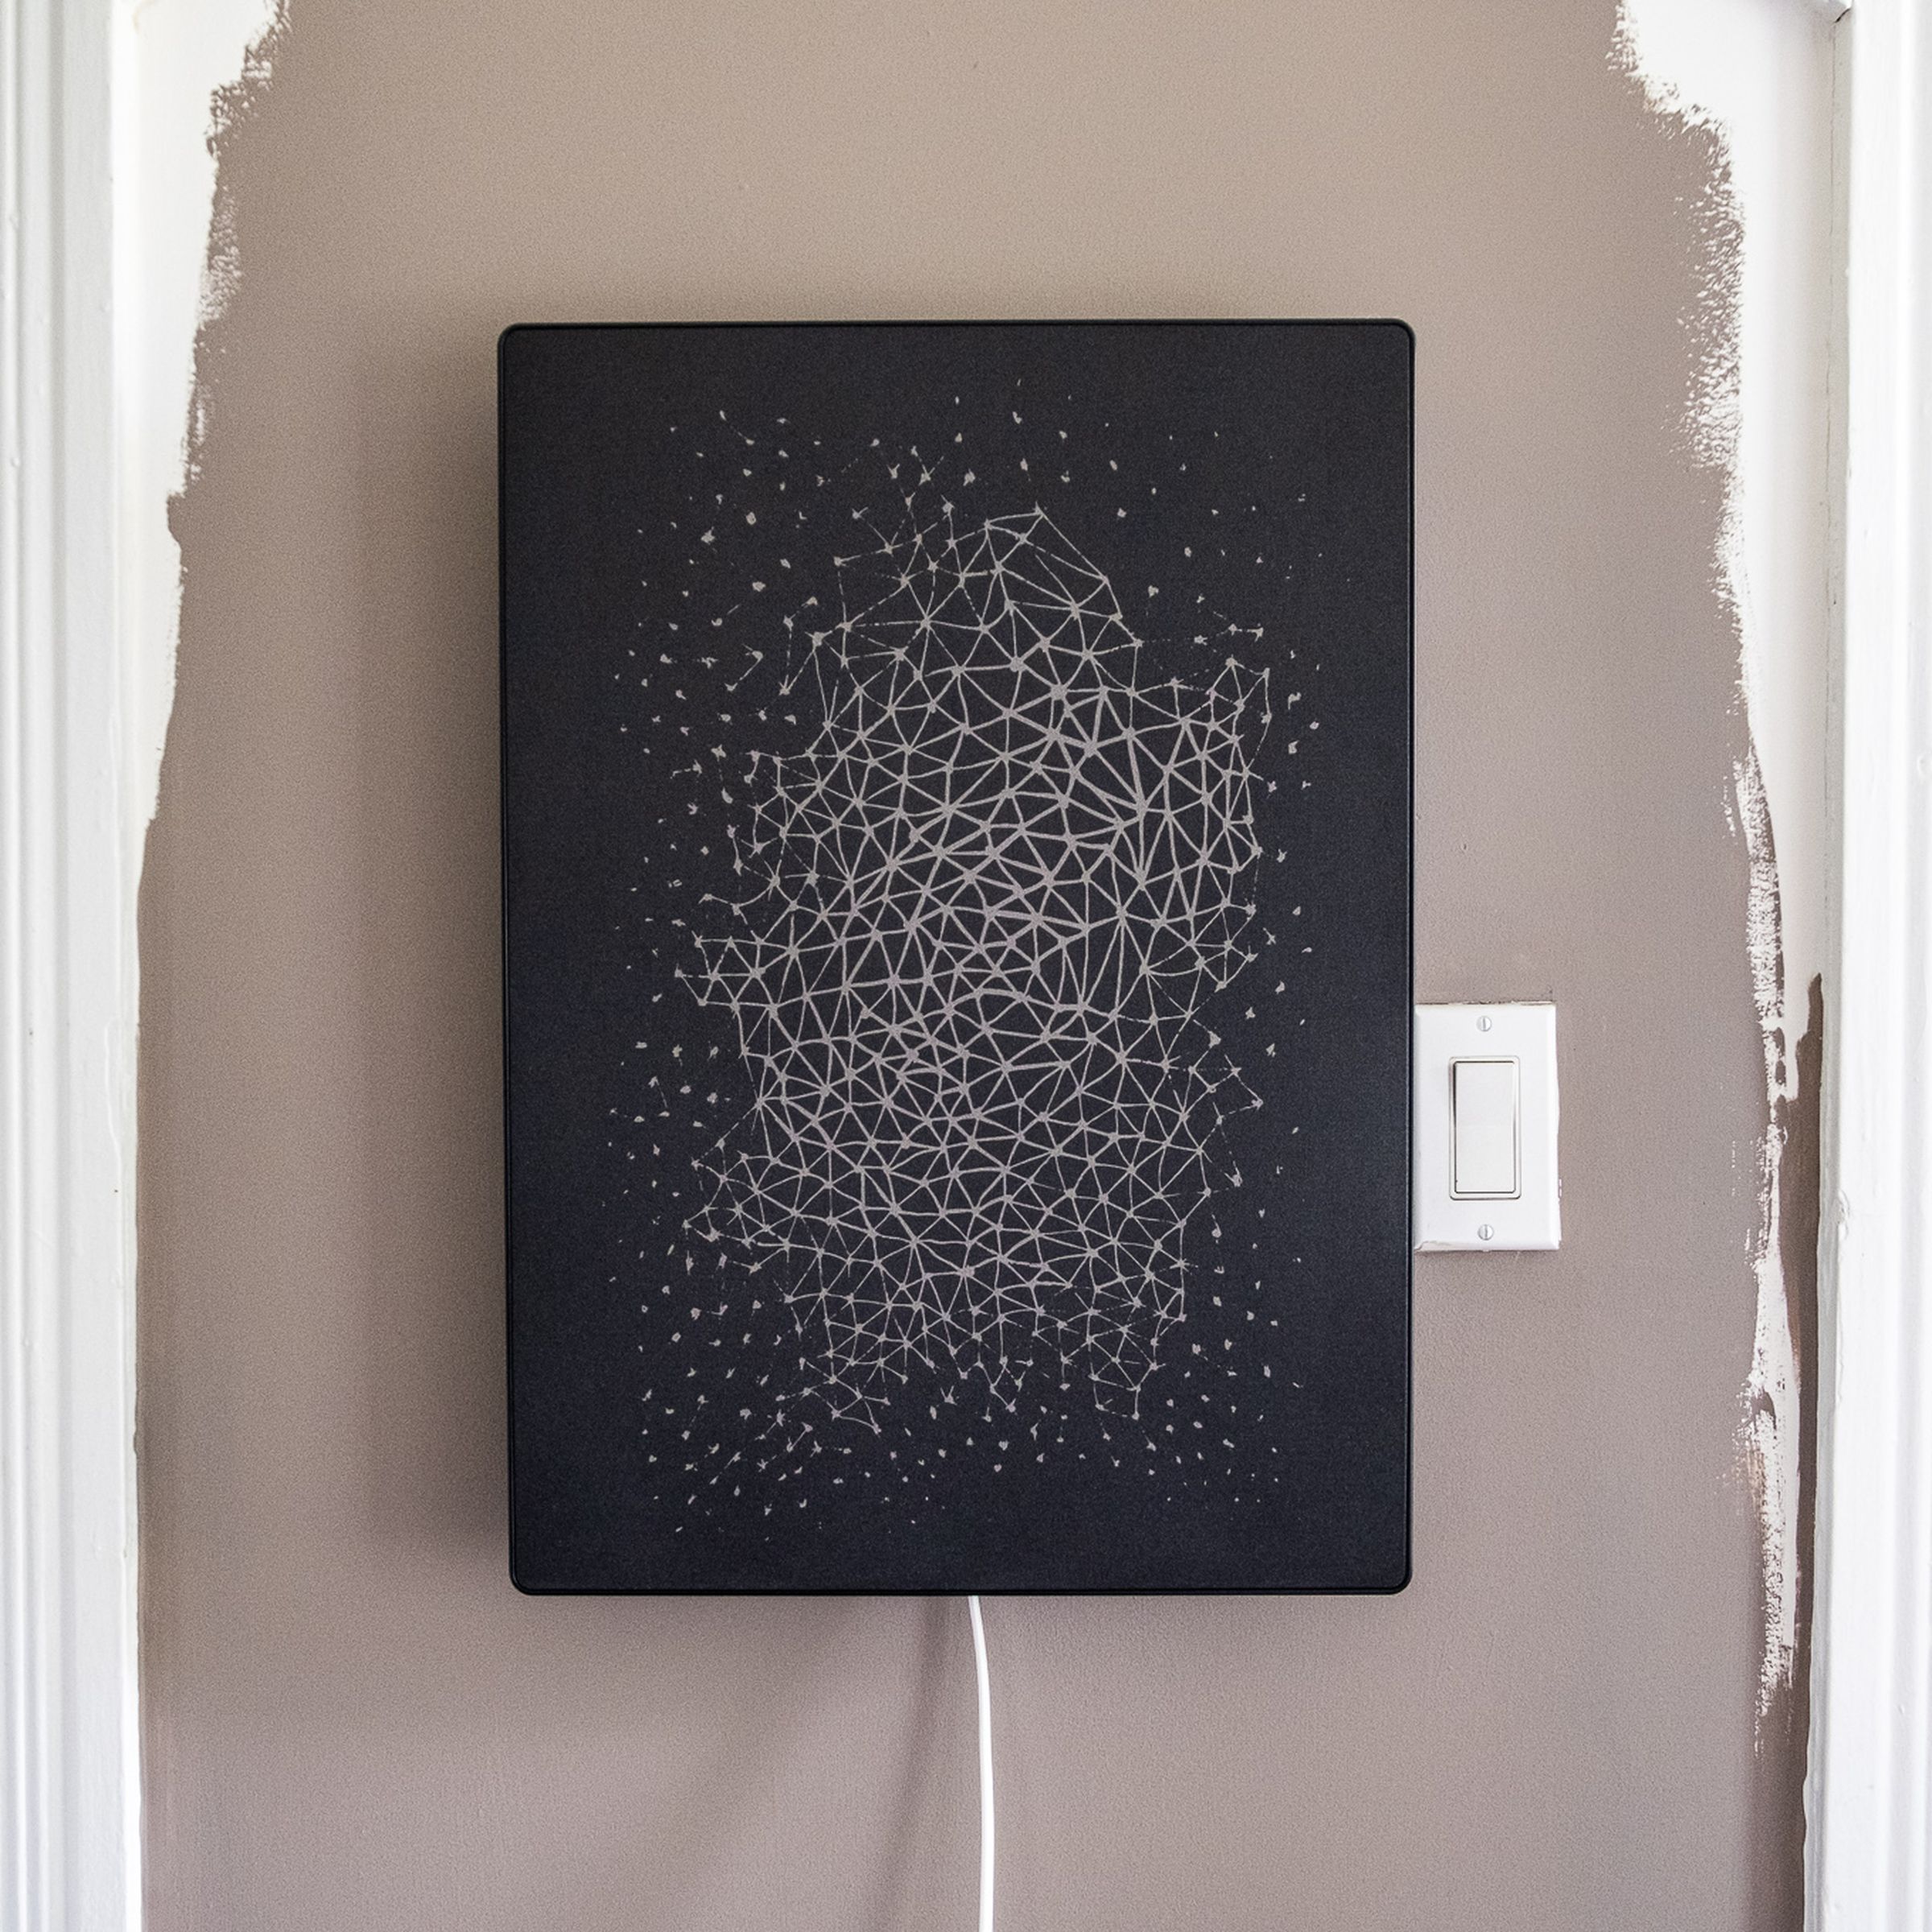 A black Ikea picture frame speaker with a geometric pattern design mounted on a wall beside a light switch.